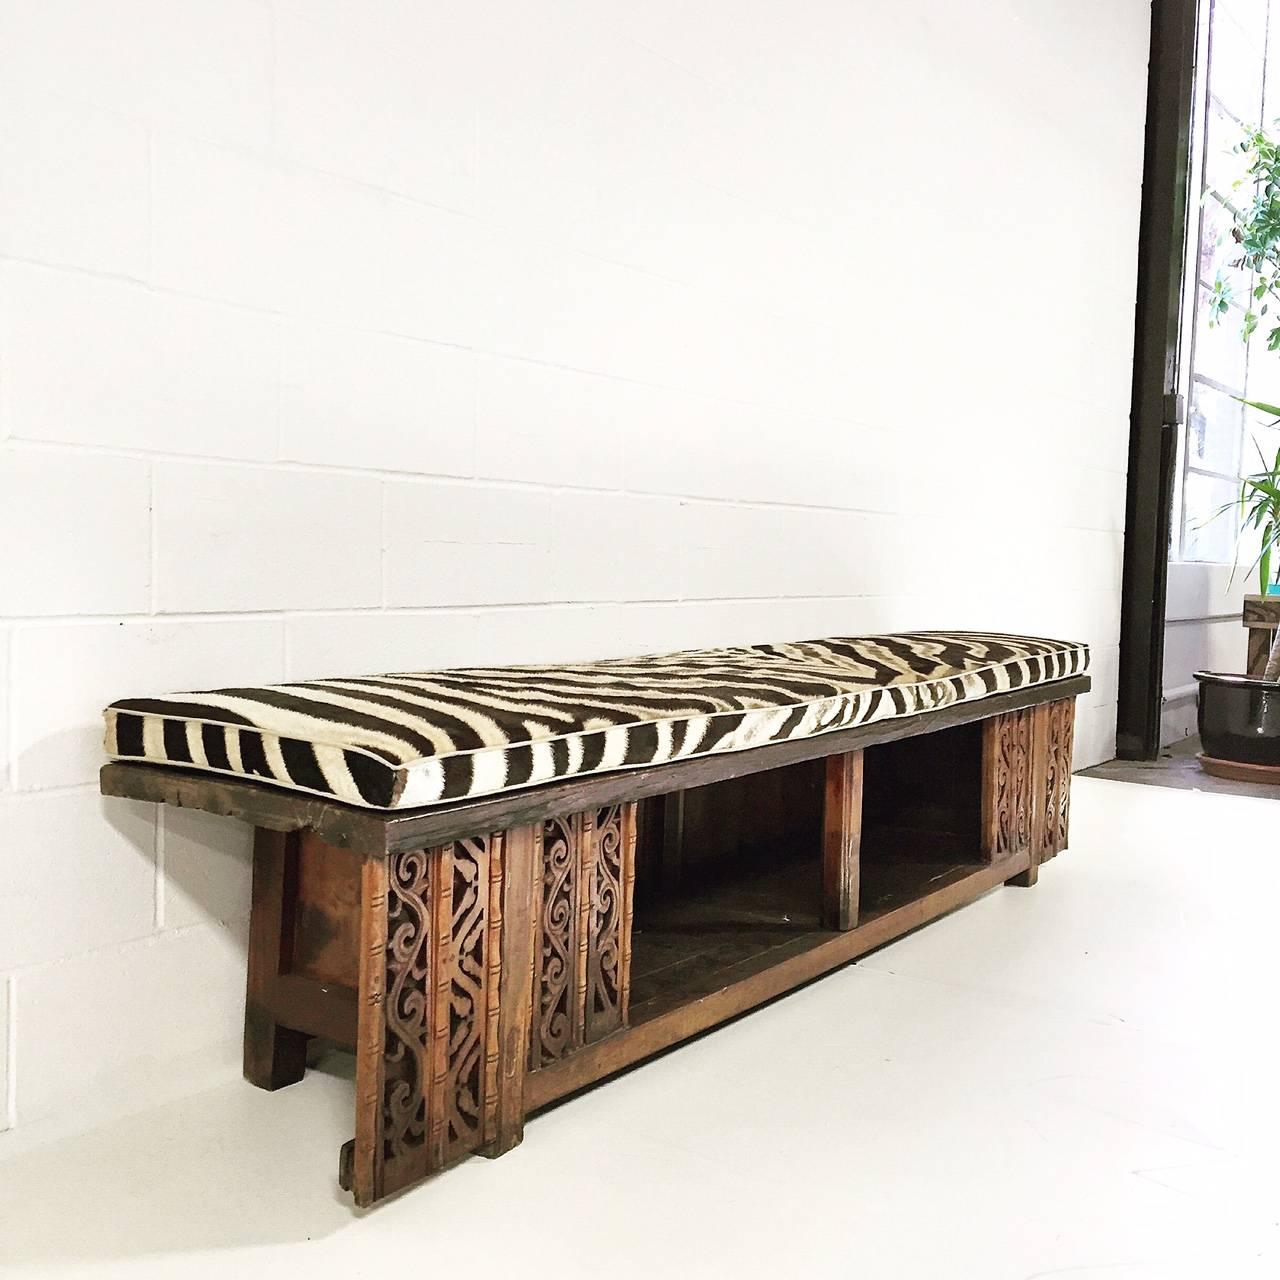 20th Century Vintage Carved Chinese Bench with Zebra Hide Cushion